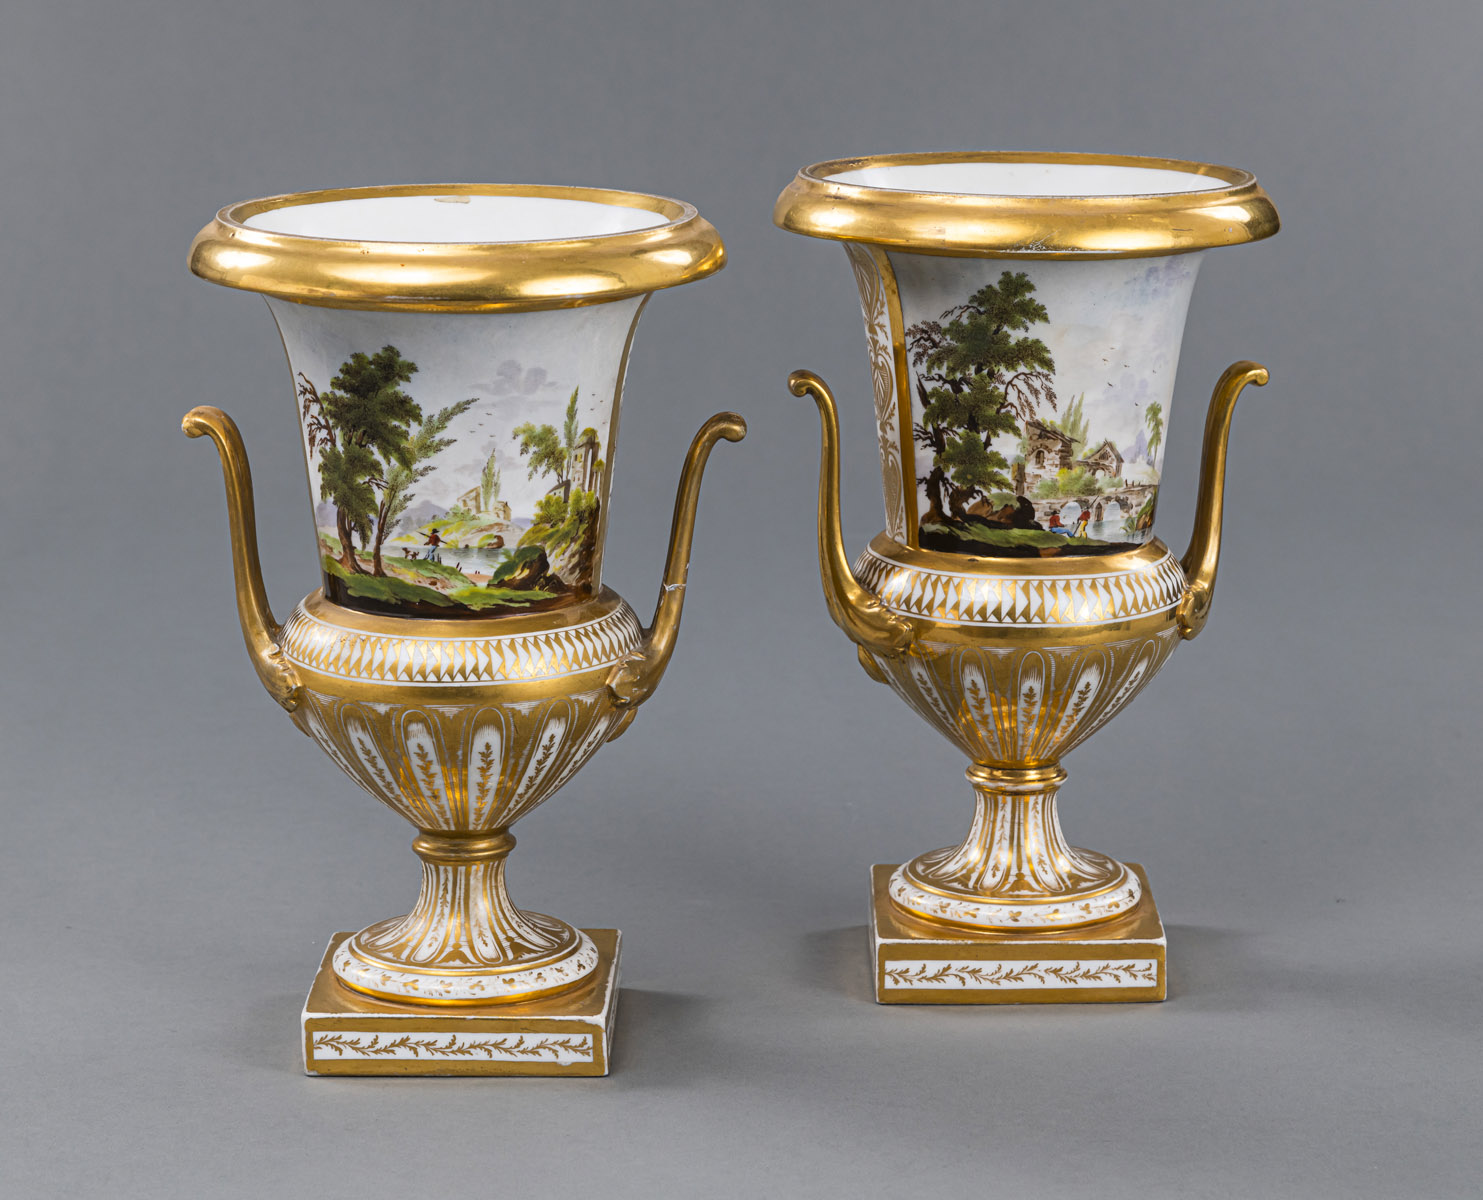 A PAIR OF LANDSCAPE PATTERN AND GILT MEDICI VASES